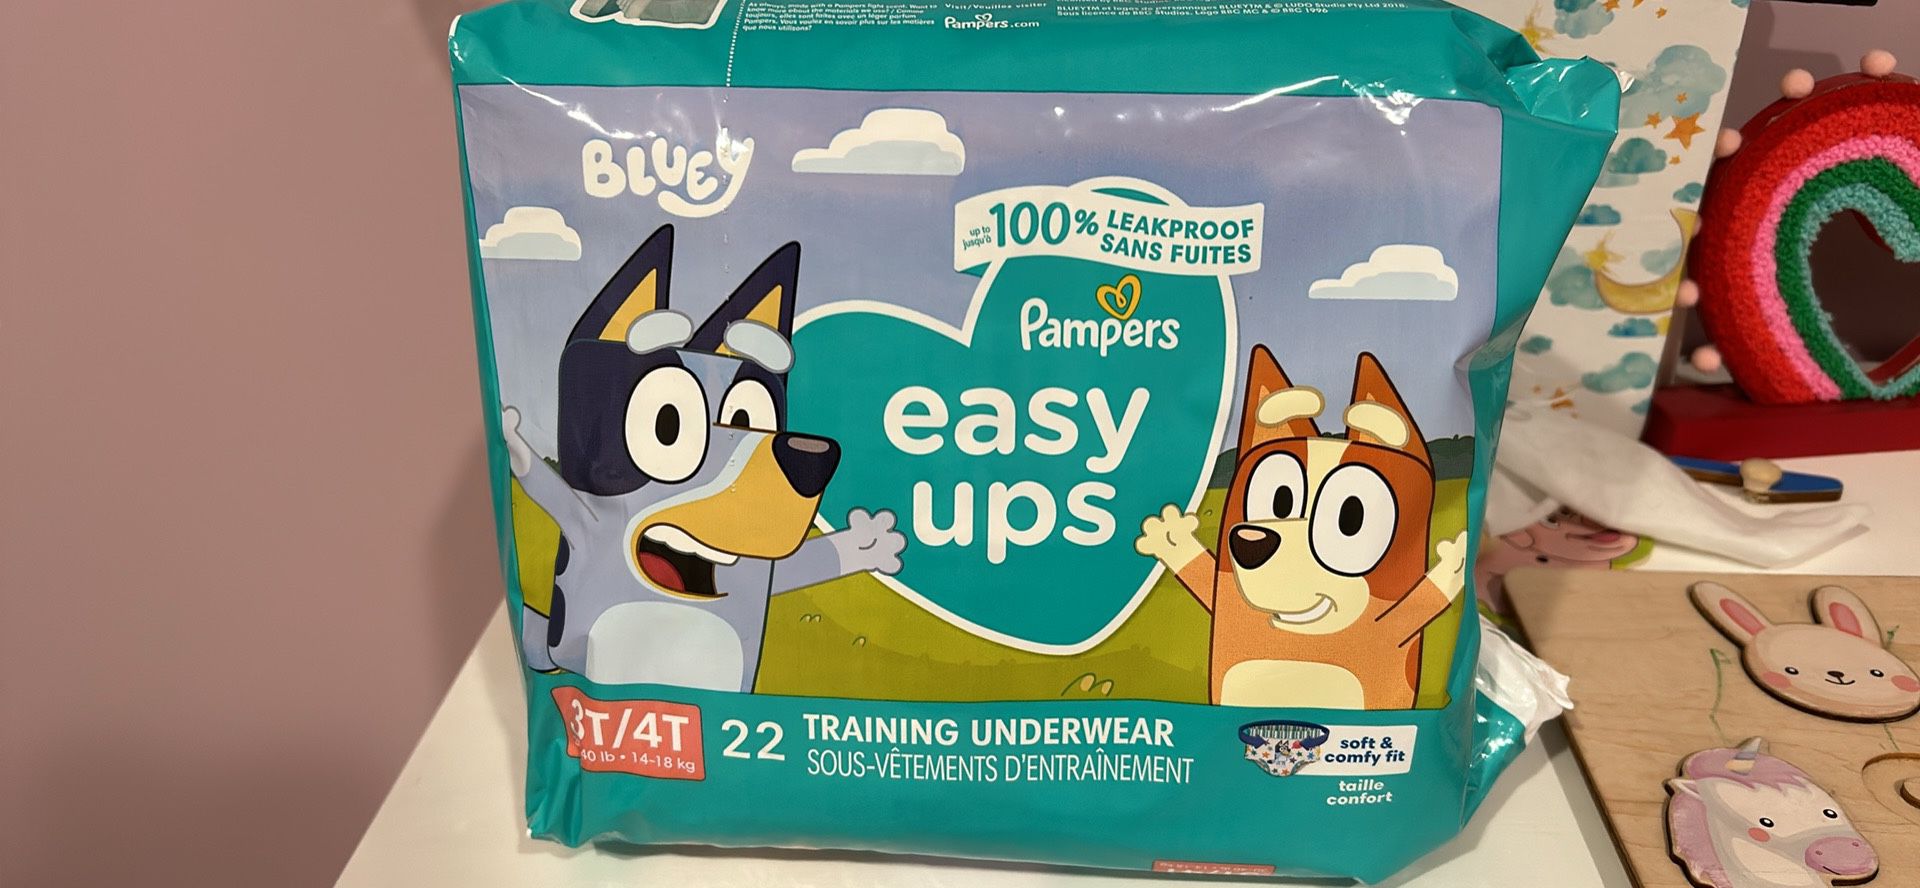 Bluey Easy Ups Pampers